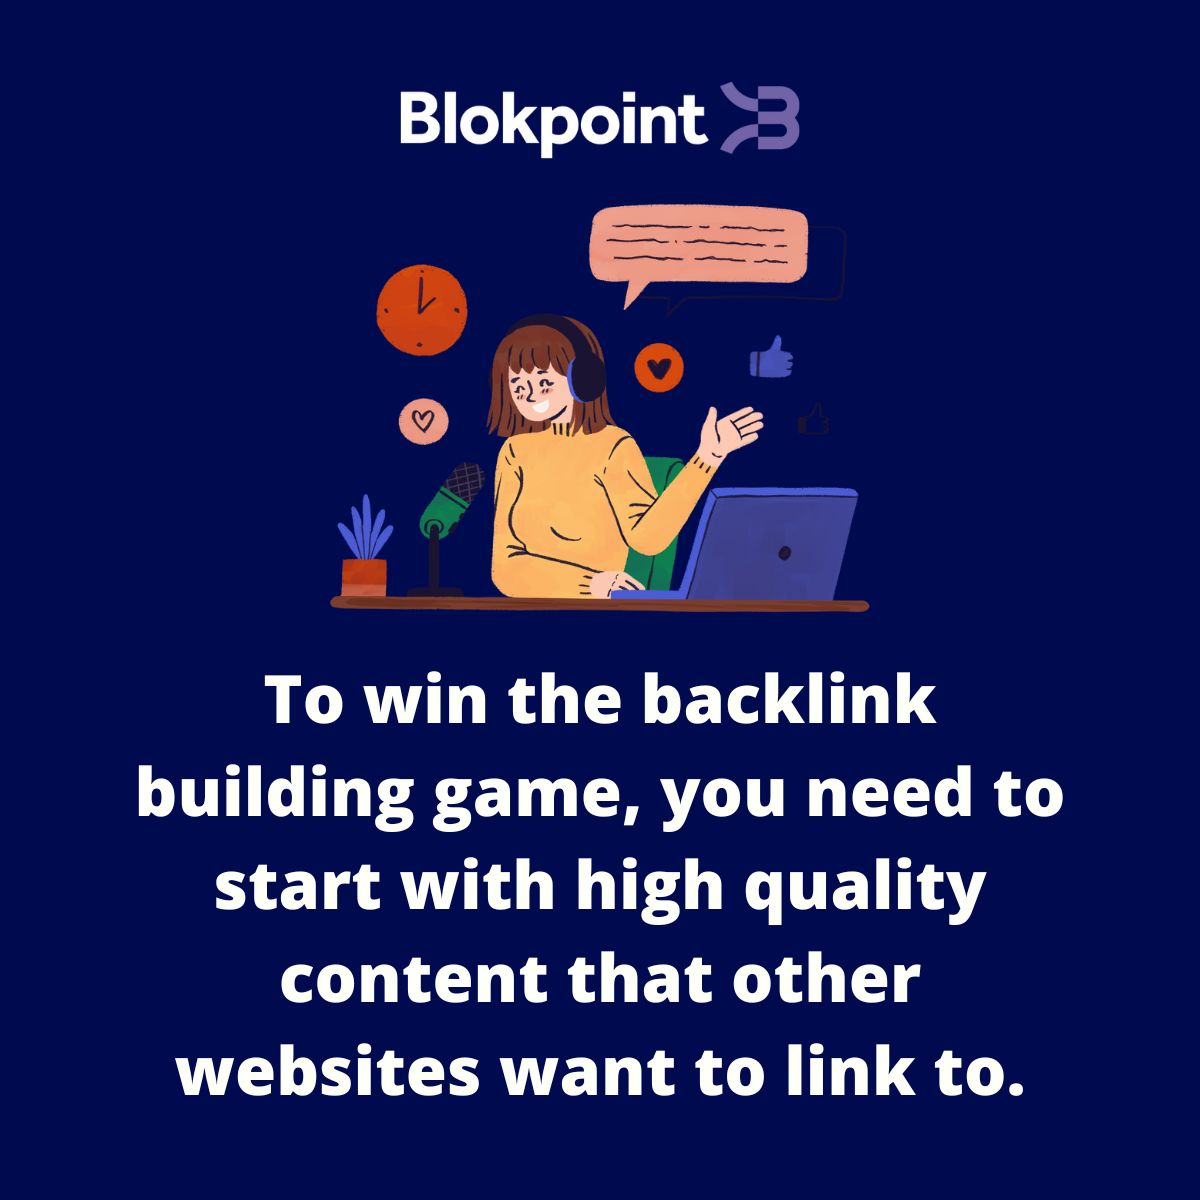 Win the backlink-building game with high-quality content that other sites want to link to!

You don’t want any #backlinks. Gain readers’ trust with #qualitycontent and high-quality backlinks from reputable websites will come.

Learn more in this post: blokpoint.com/seo-for-blockc…